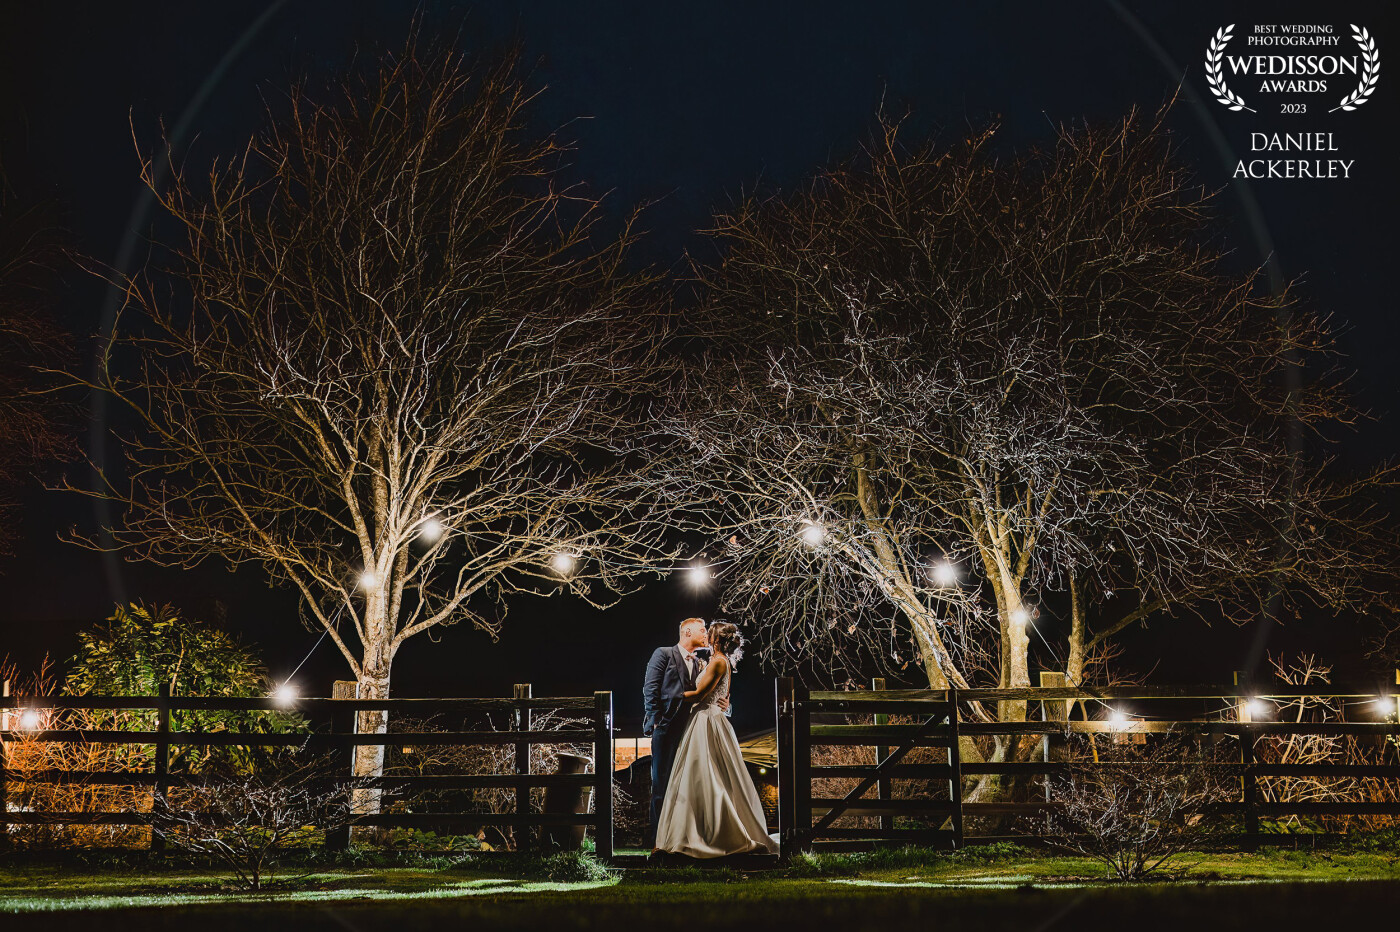 I thought the lighting at Crockwell Farm would make for a really romantic night time portrait with Fraser and Dani, so we waited until the night had come in and we nipped out quickly to grab this photo using a little off camera flash to light the couple.